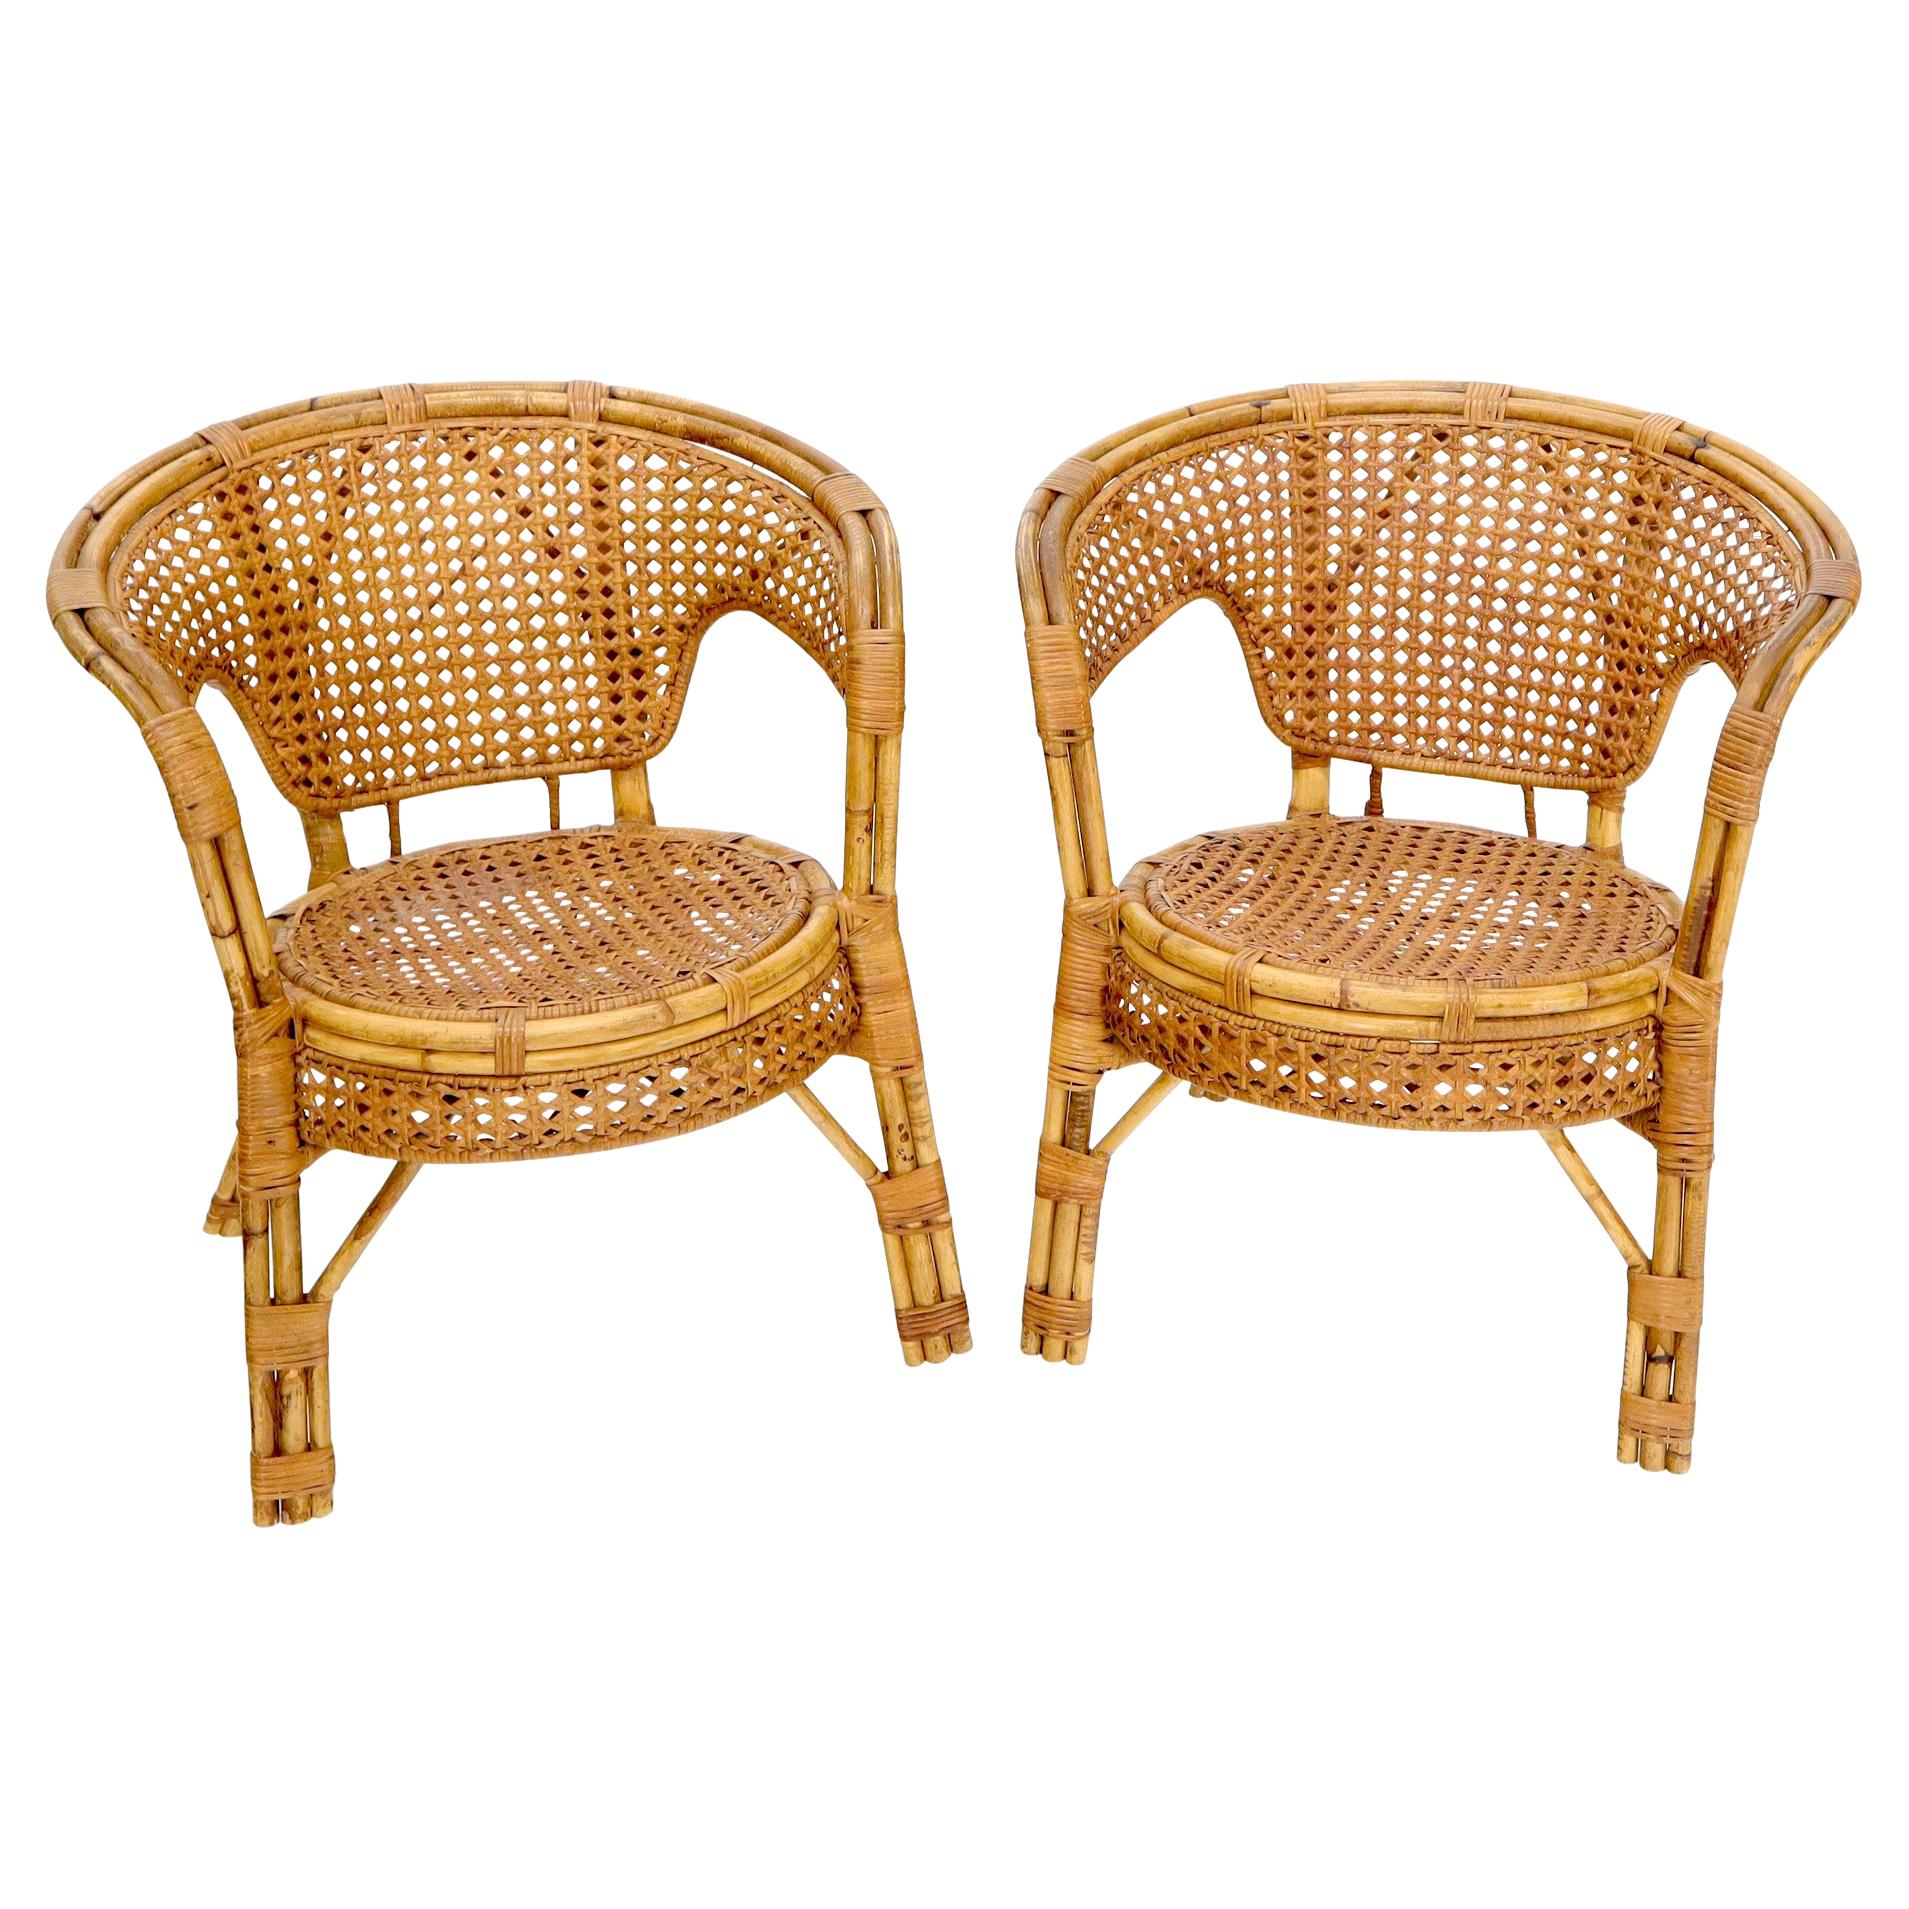 Pair of Stunning Round Barrel Shape Bamboo Rattan Cane Seat Chairs For Sale